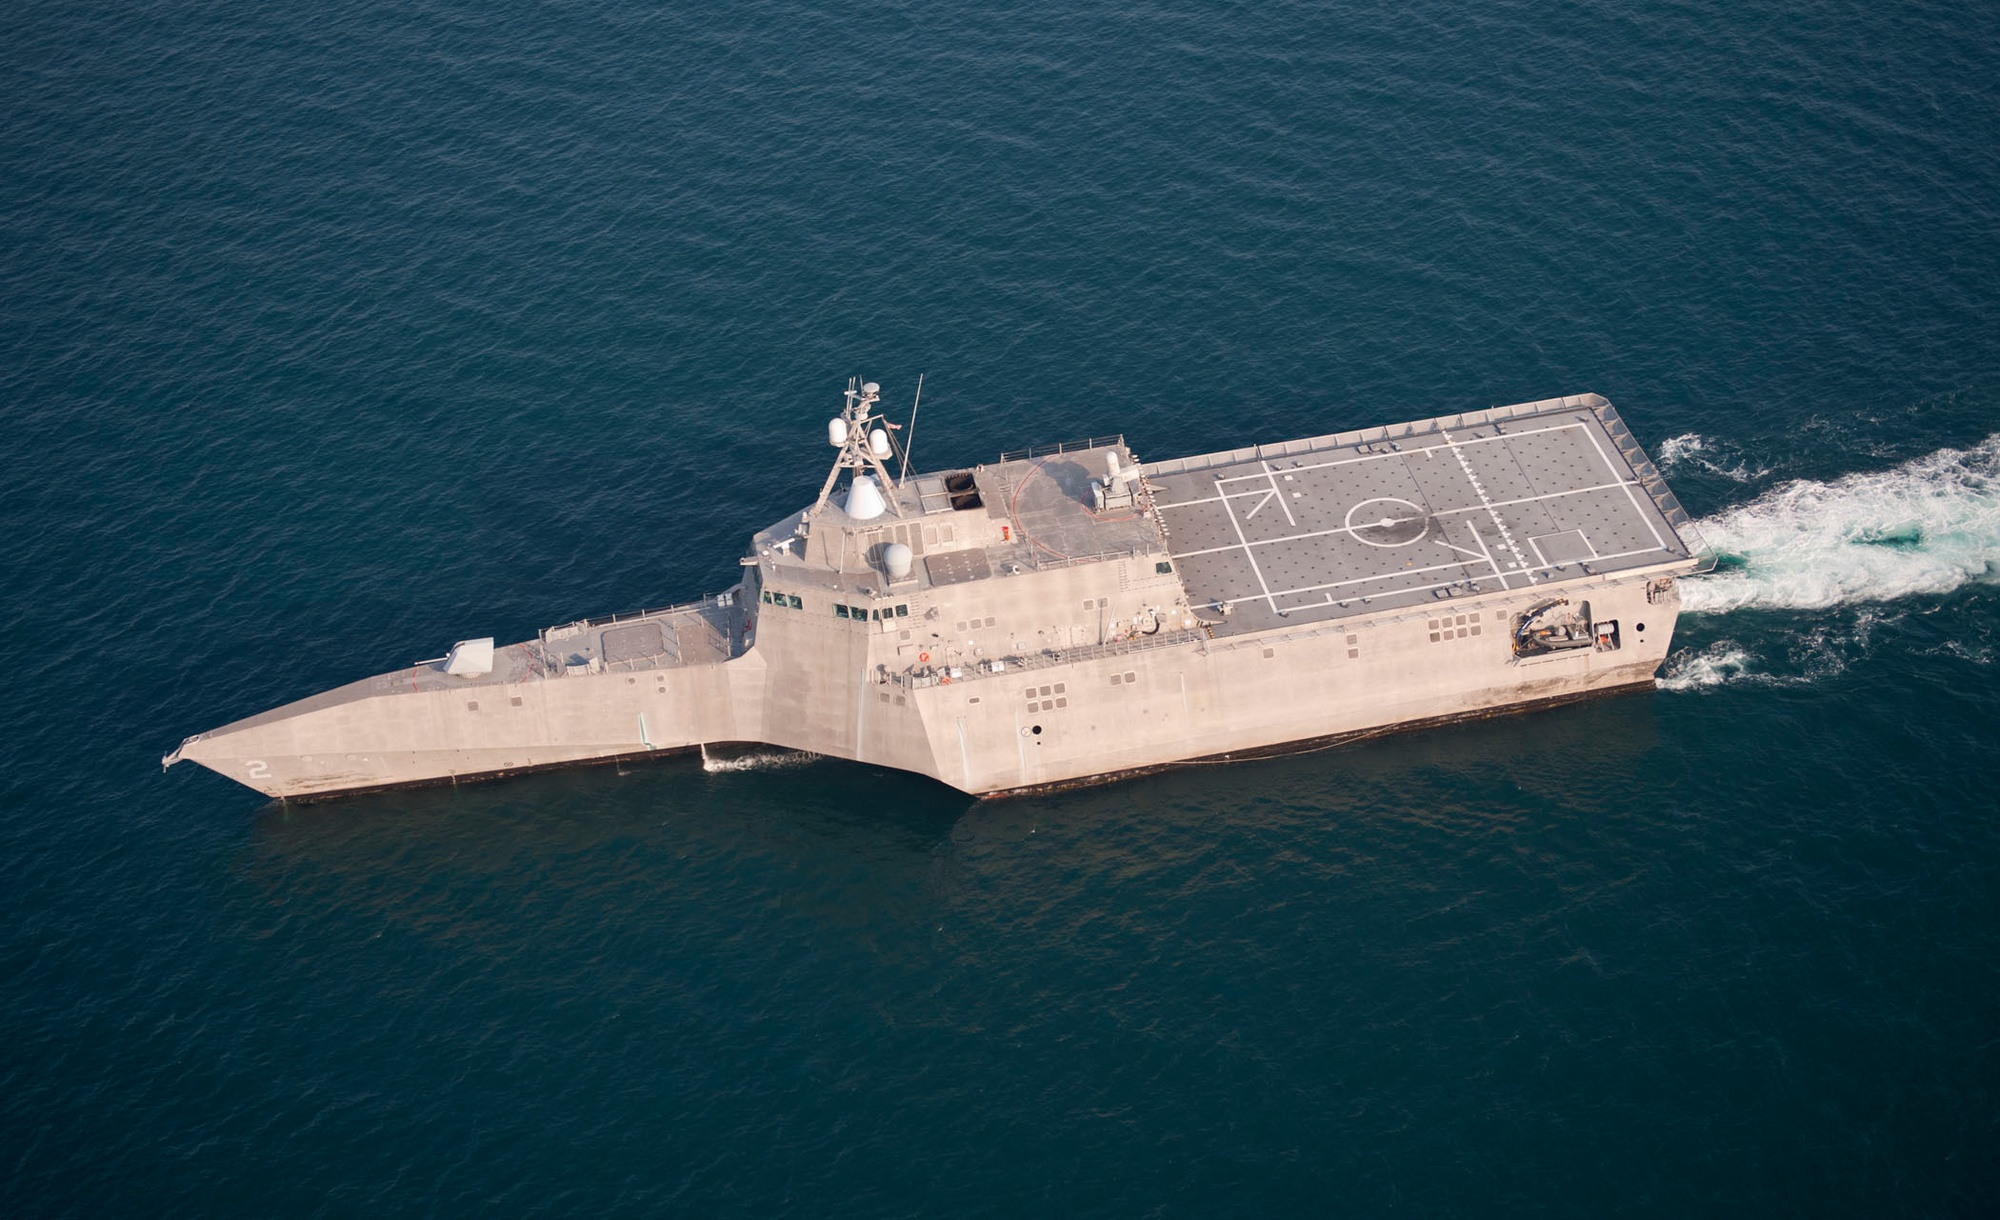 The littoral combat ship USS Independence (LCS 2) is underway in the Atlantic Ocean off the coast of Florida. Sailors assigned to Independence's Gold crew and embarked Mine Countermeasures Squadron, Detachment 1, departed Naval Station Mayport for the transit to San Diego after successfully completing testing on the mine countermeasures mission package.